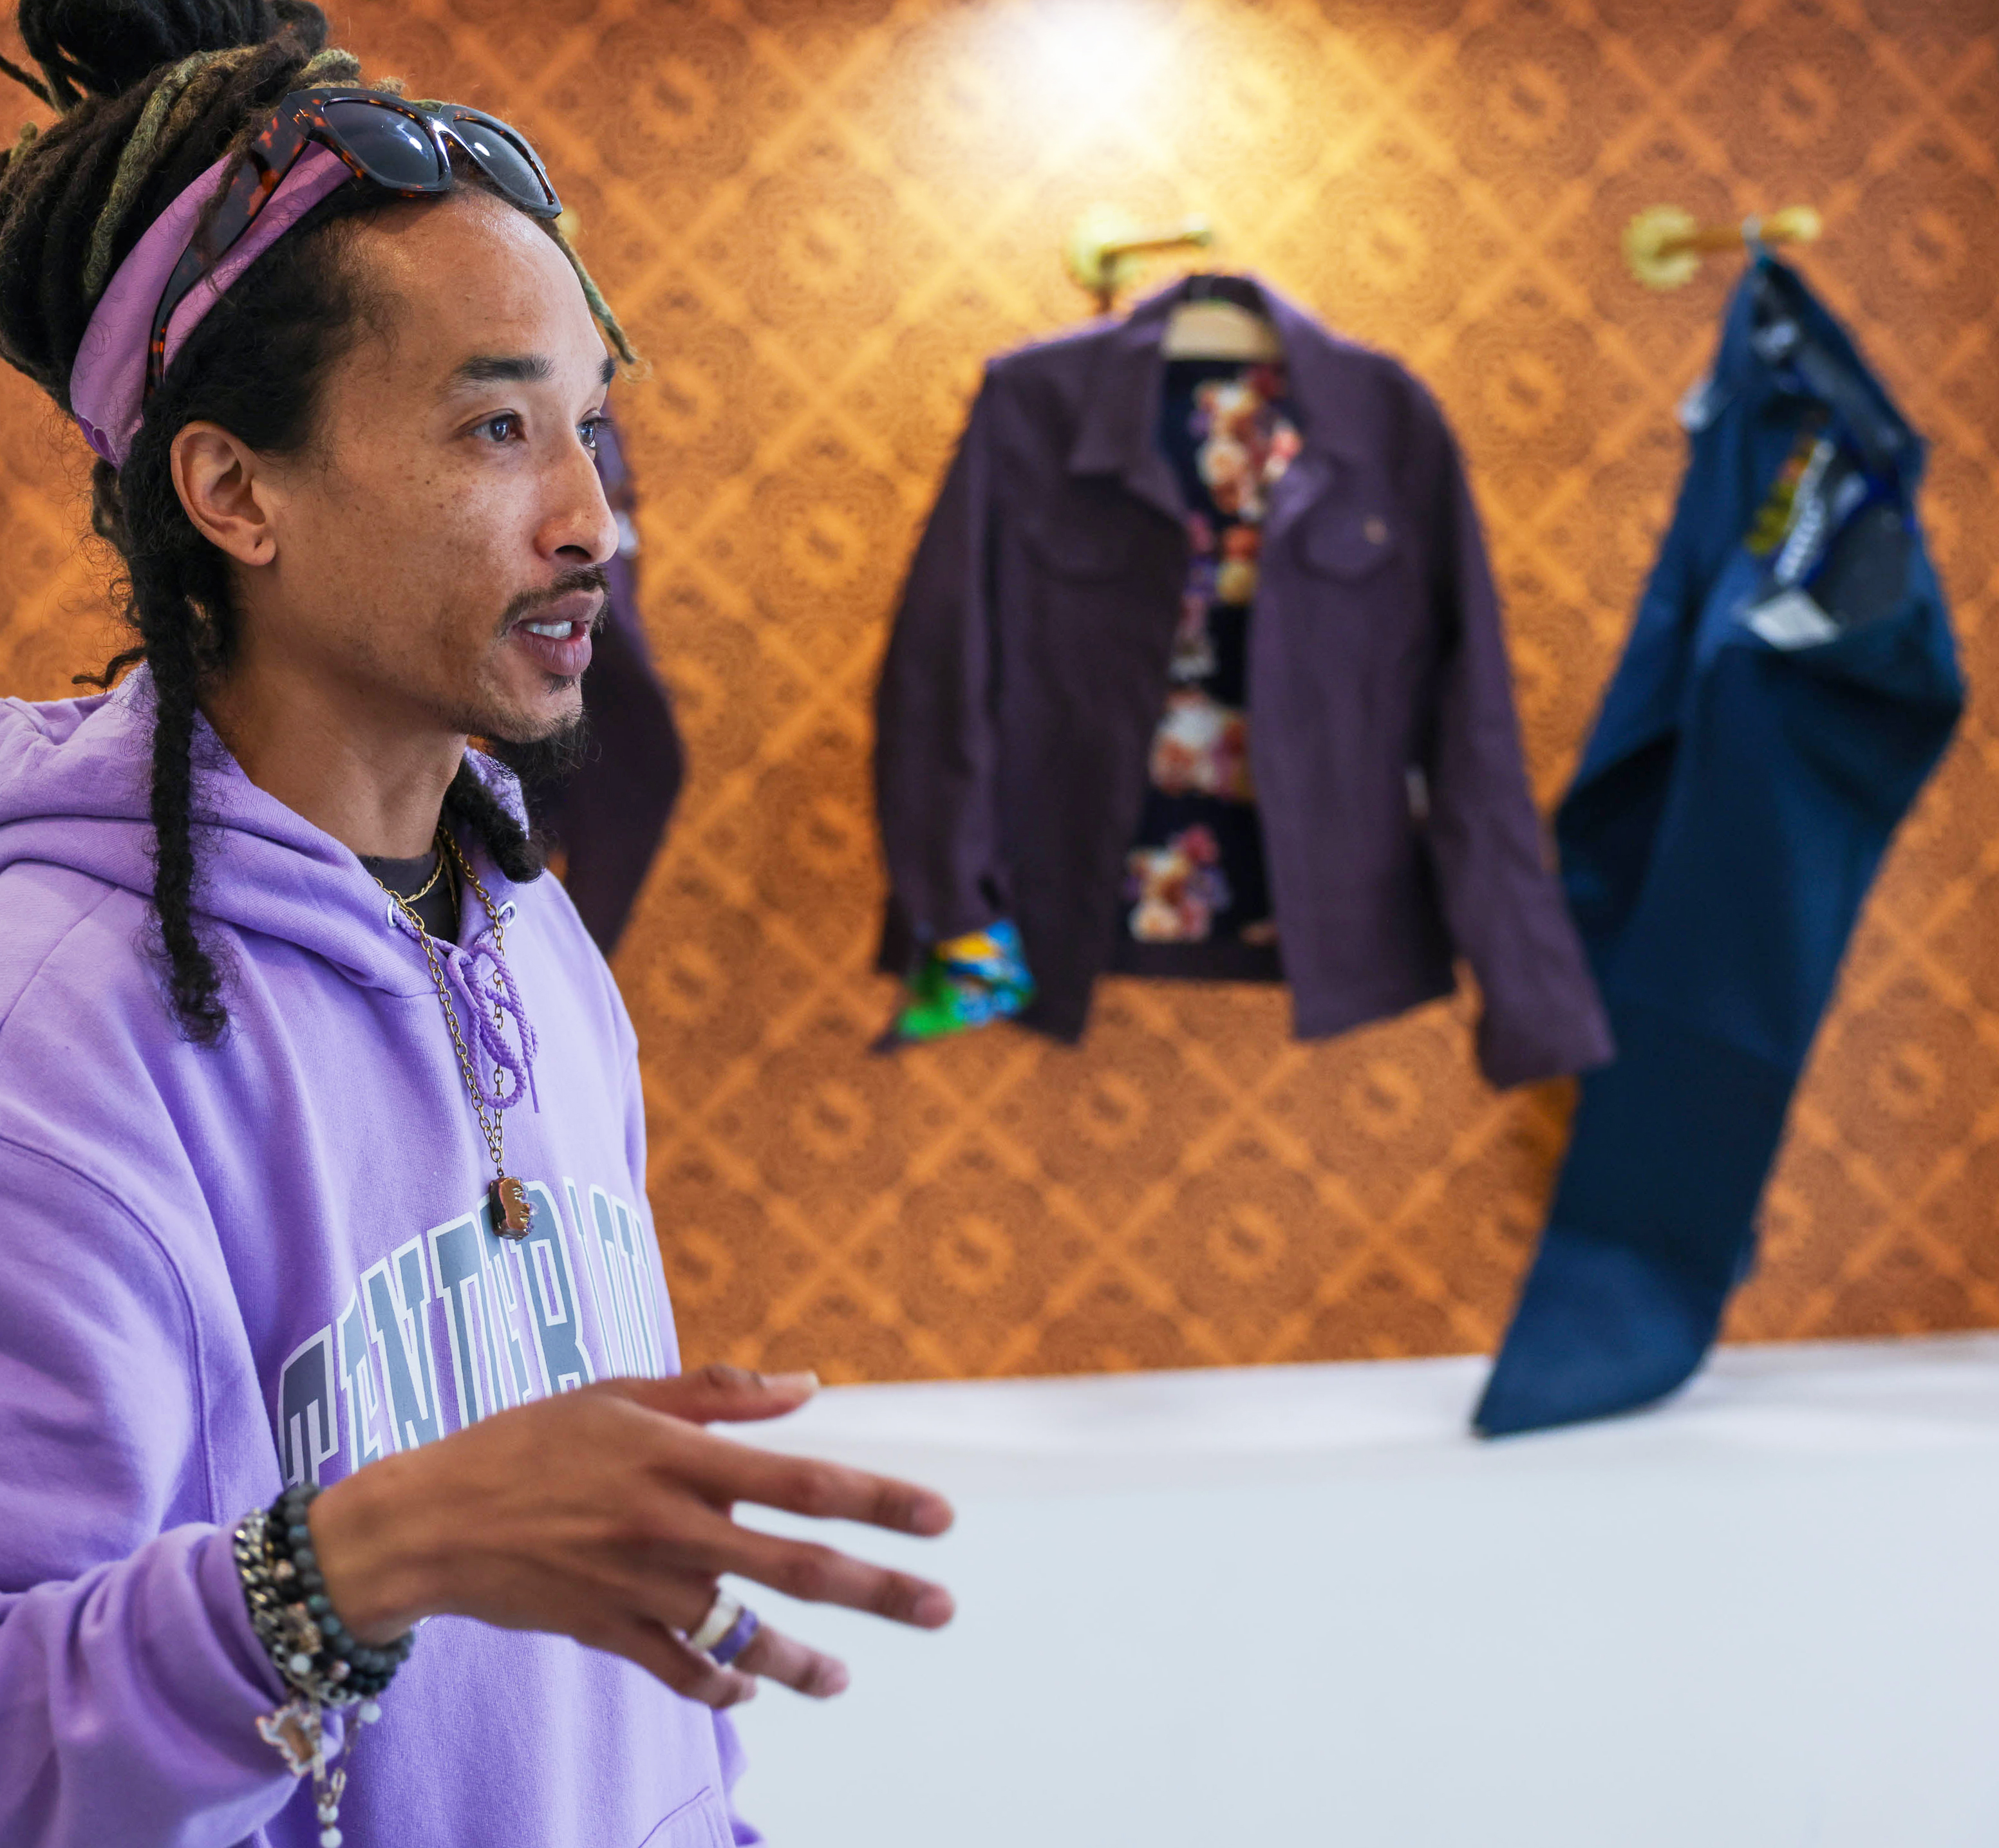 A man with dreadlocks stands in front of a wall displaying colorful jackets.